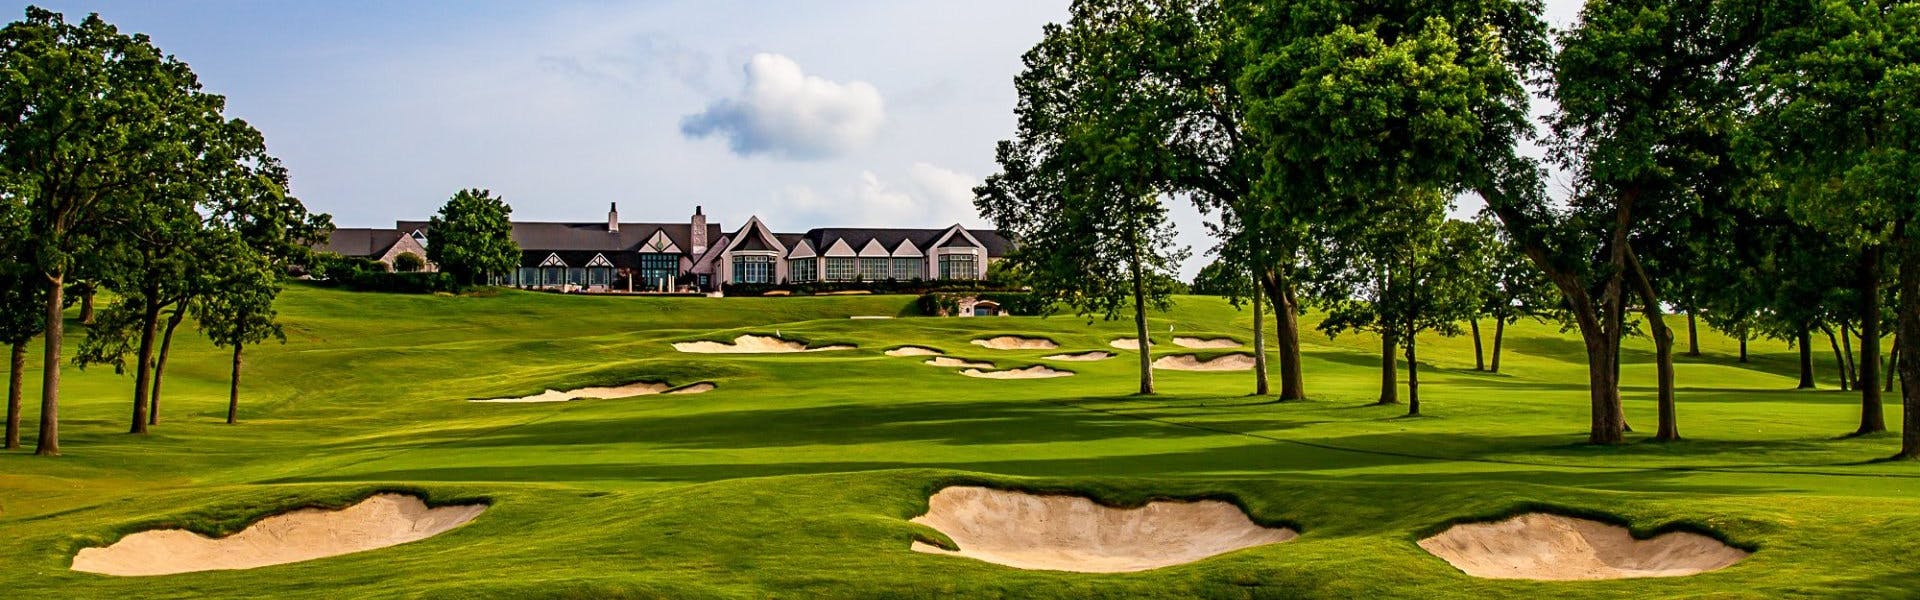 The course at Southern Hills Country Club in Tulsa, Oklahoma with the clubhouse visible in the background.